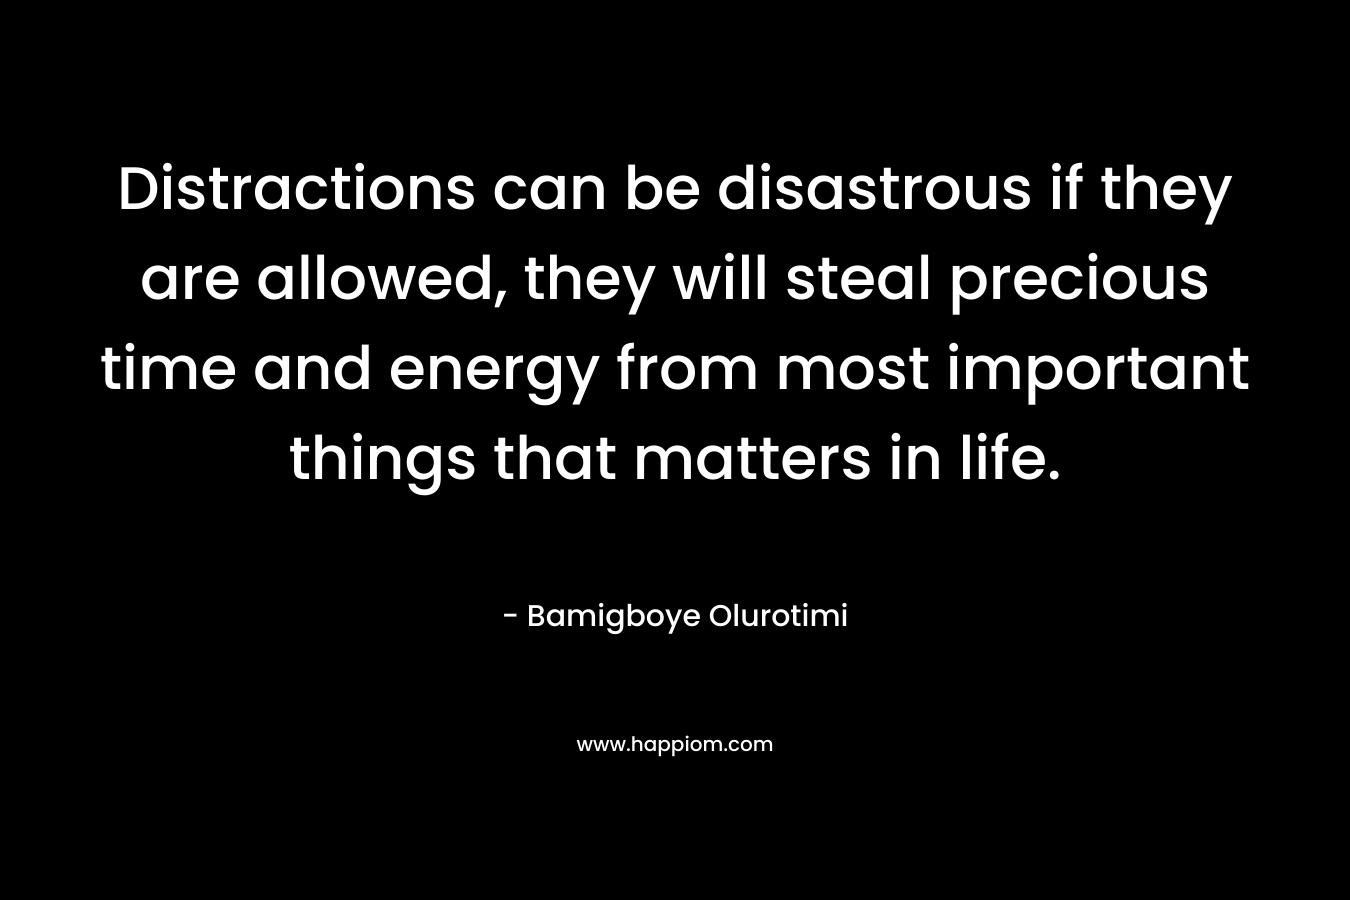 Distractions can be disastrous if they are allowed, they will steal precious time and energy from most important things that matters in life. – Bamigboye Olurotimi